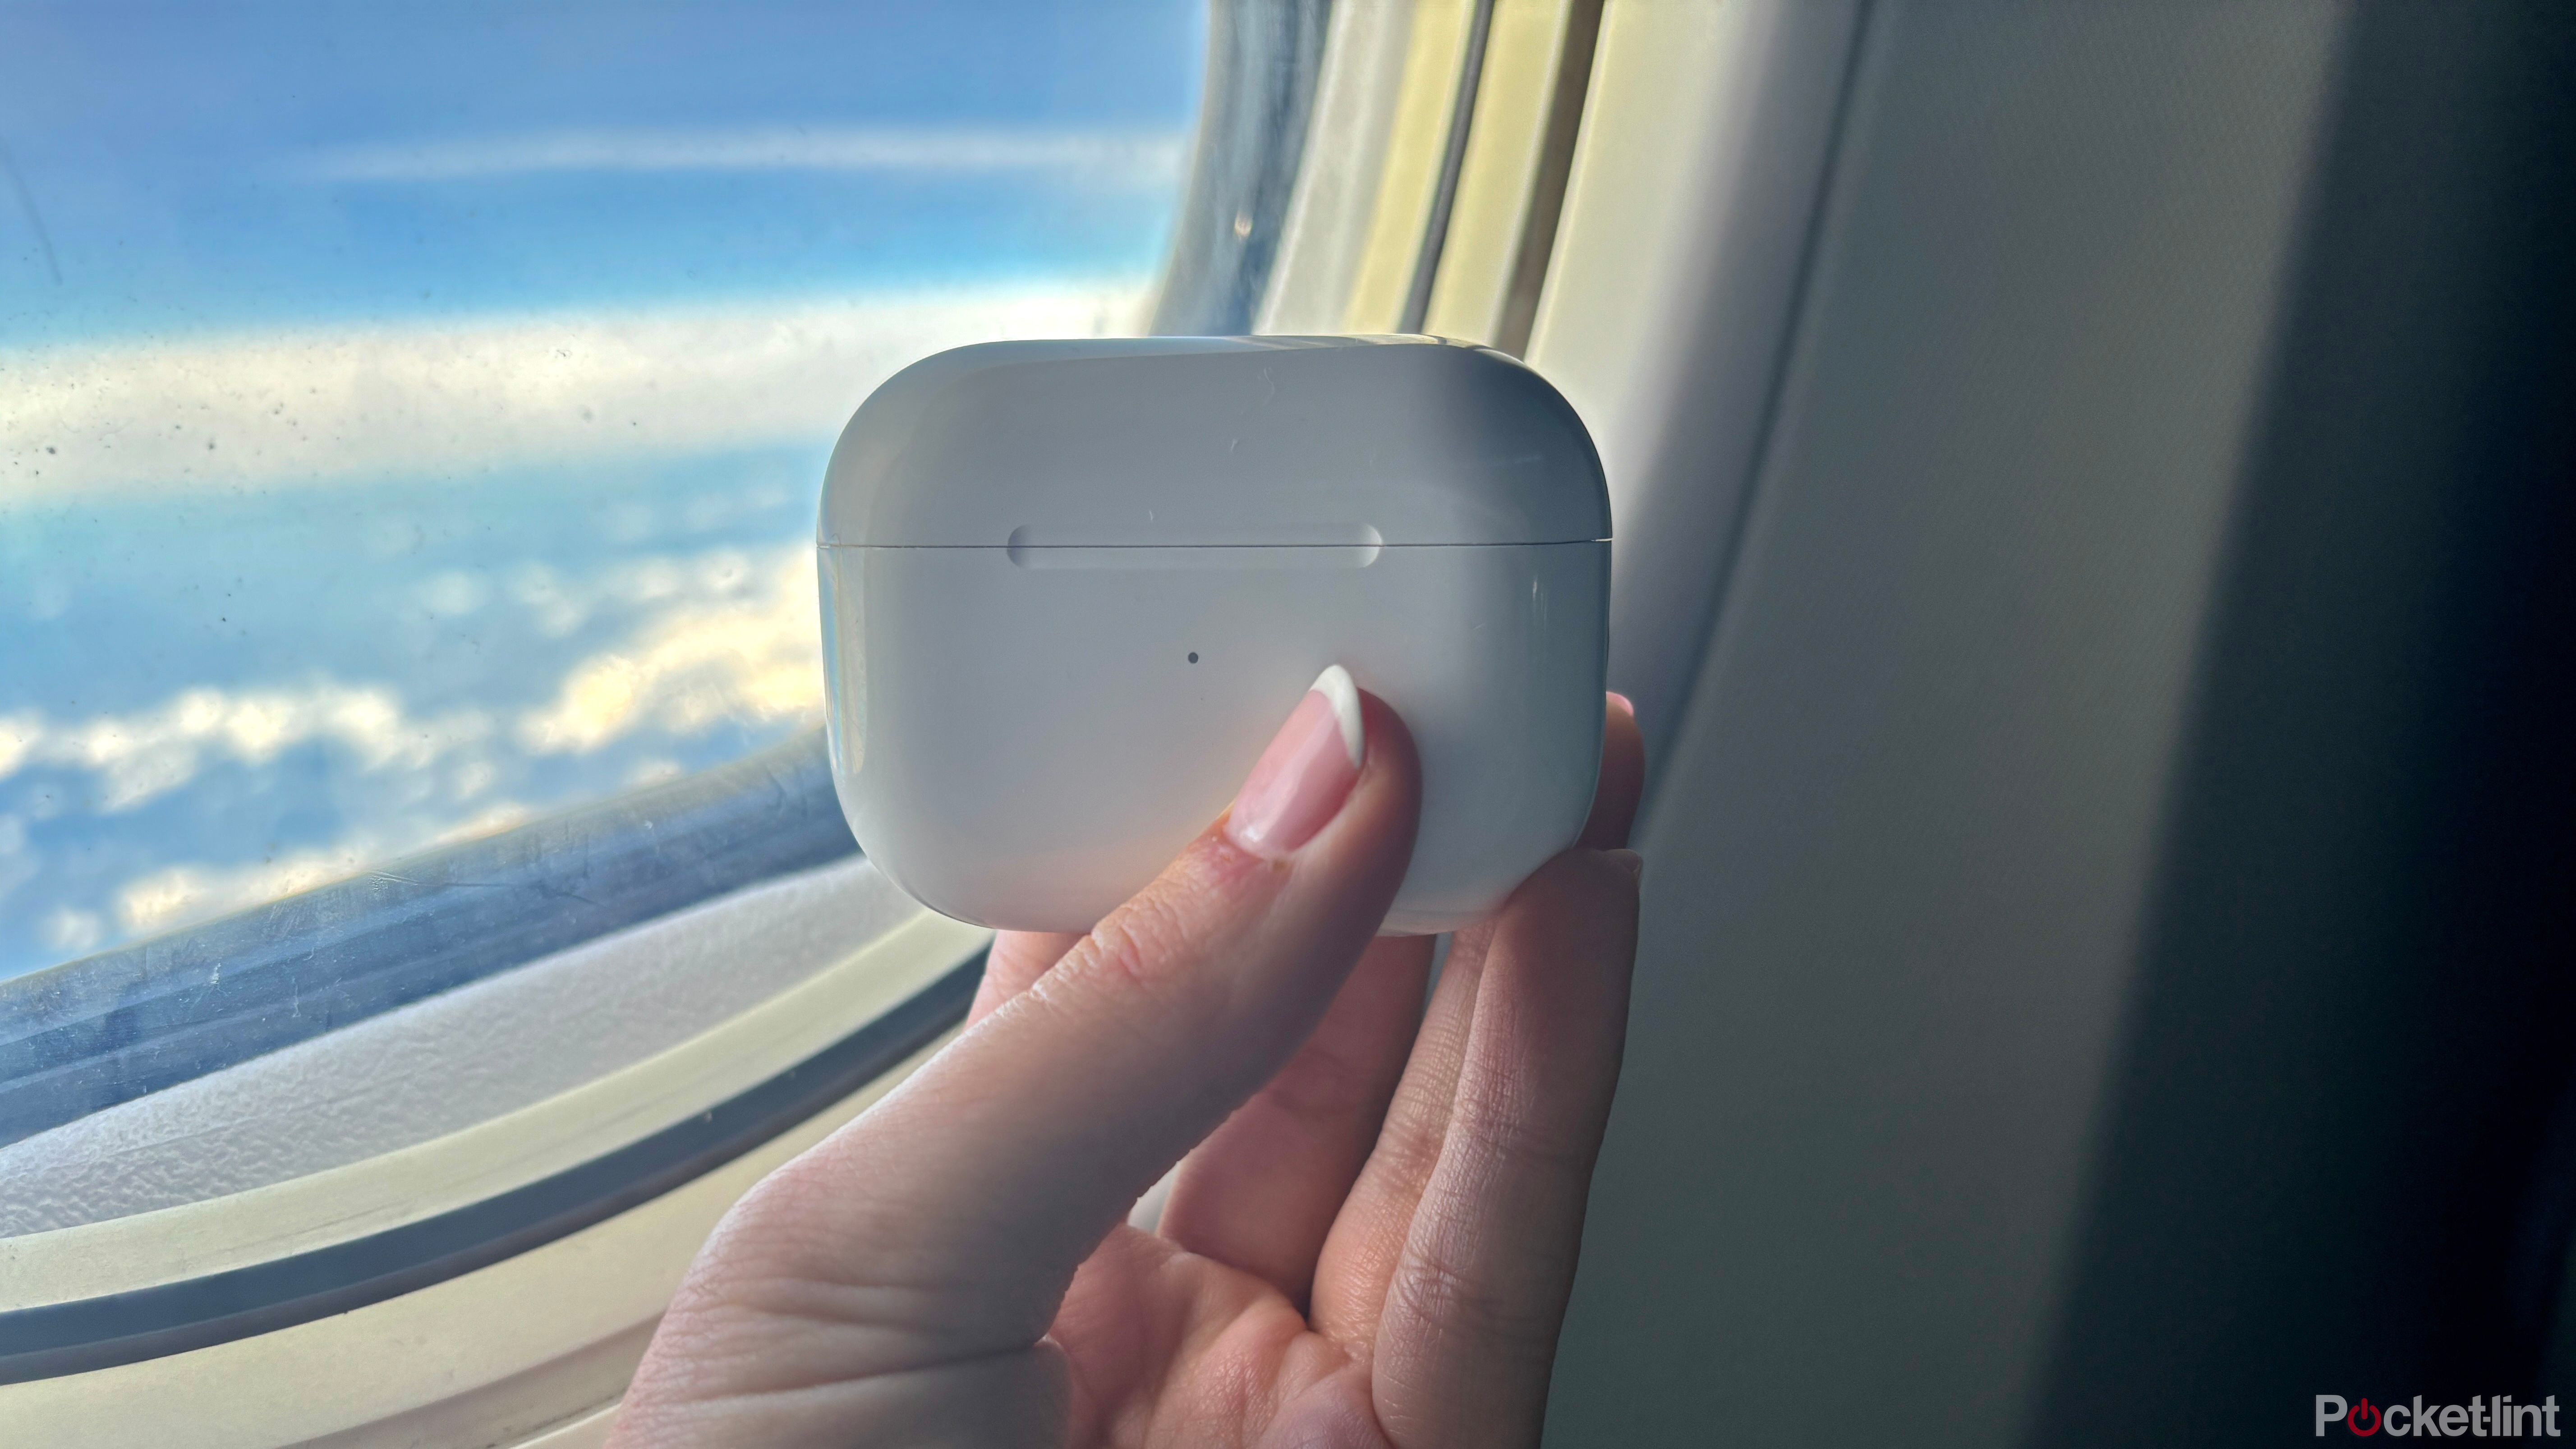 AirPods next to an airplane window